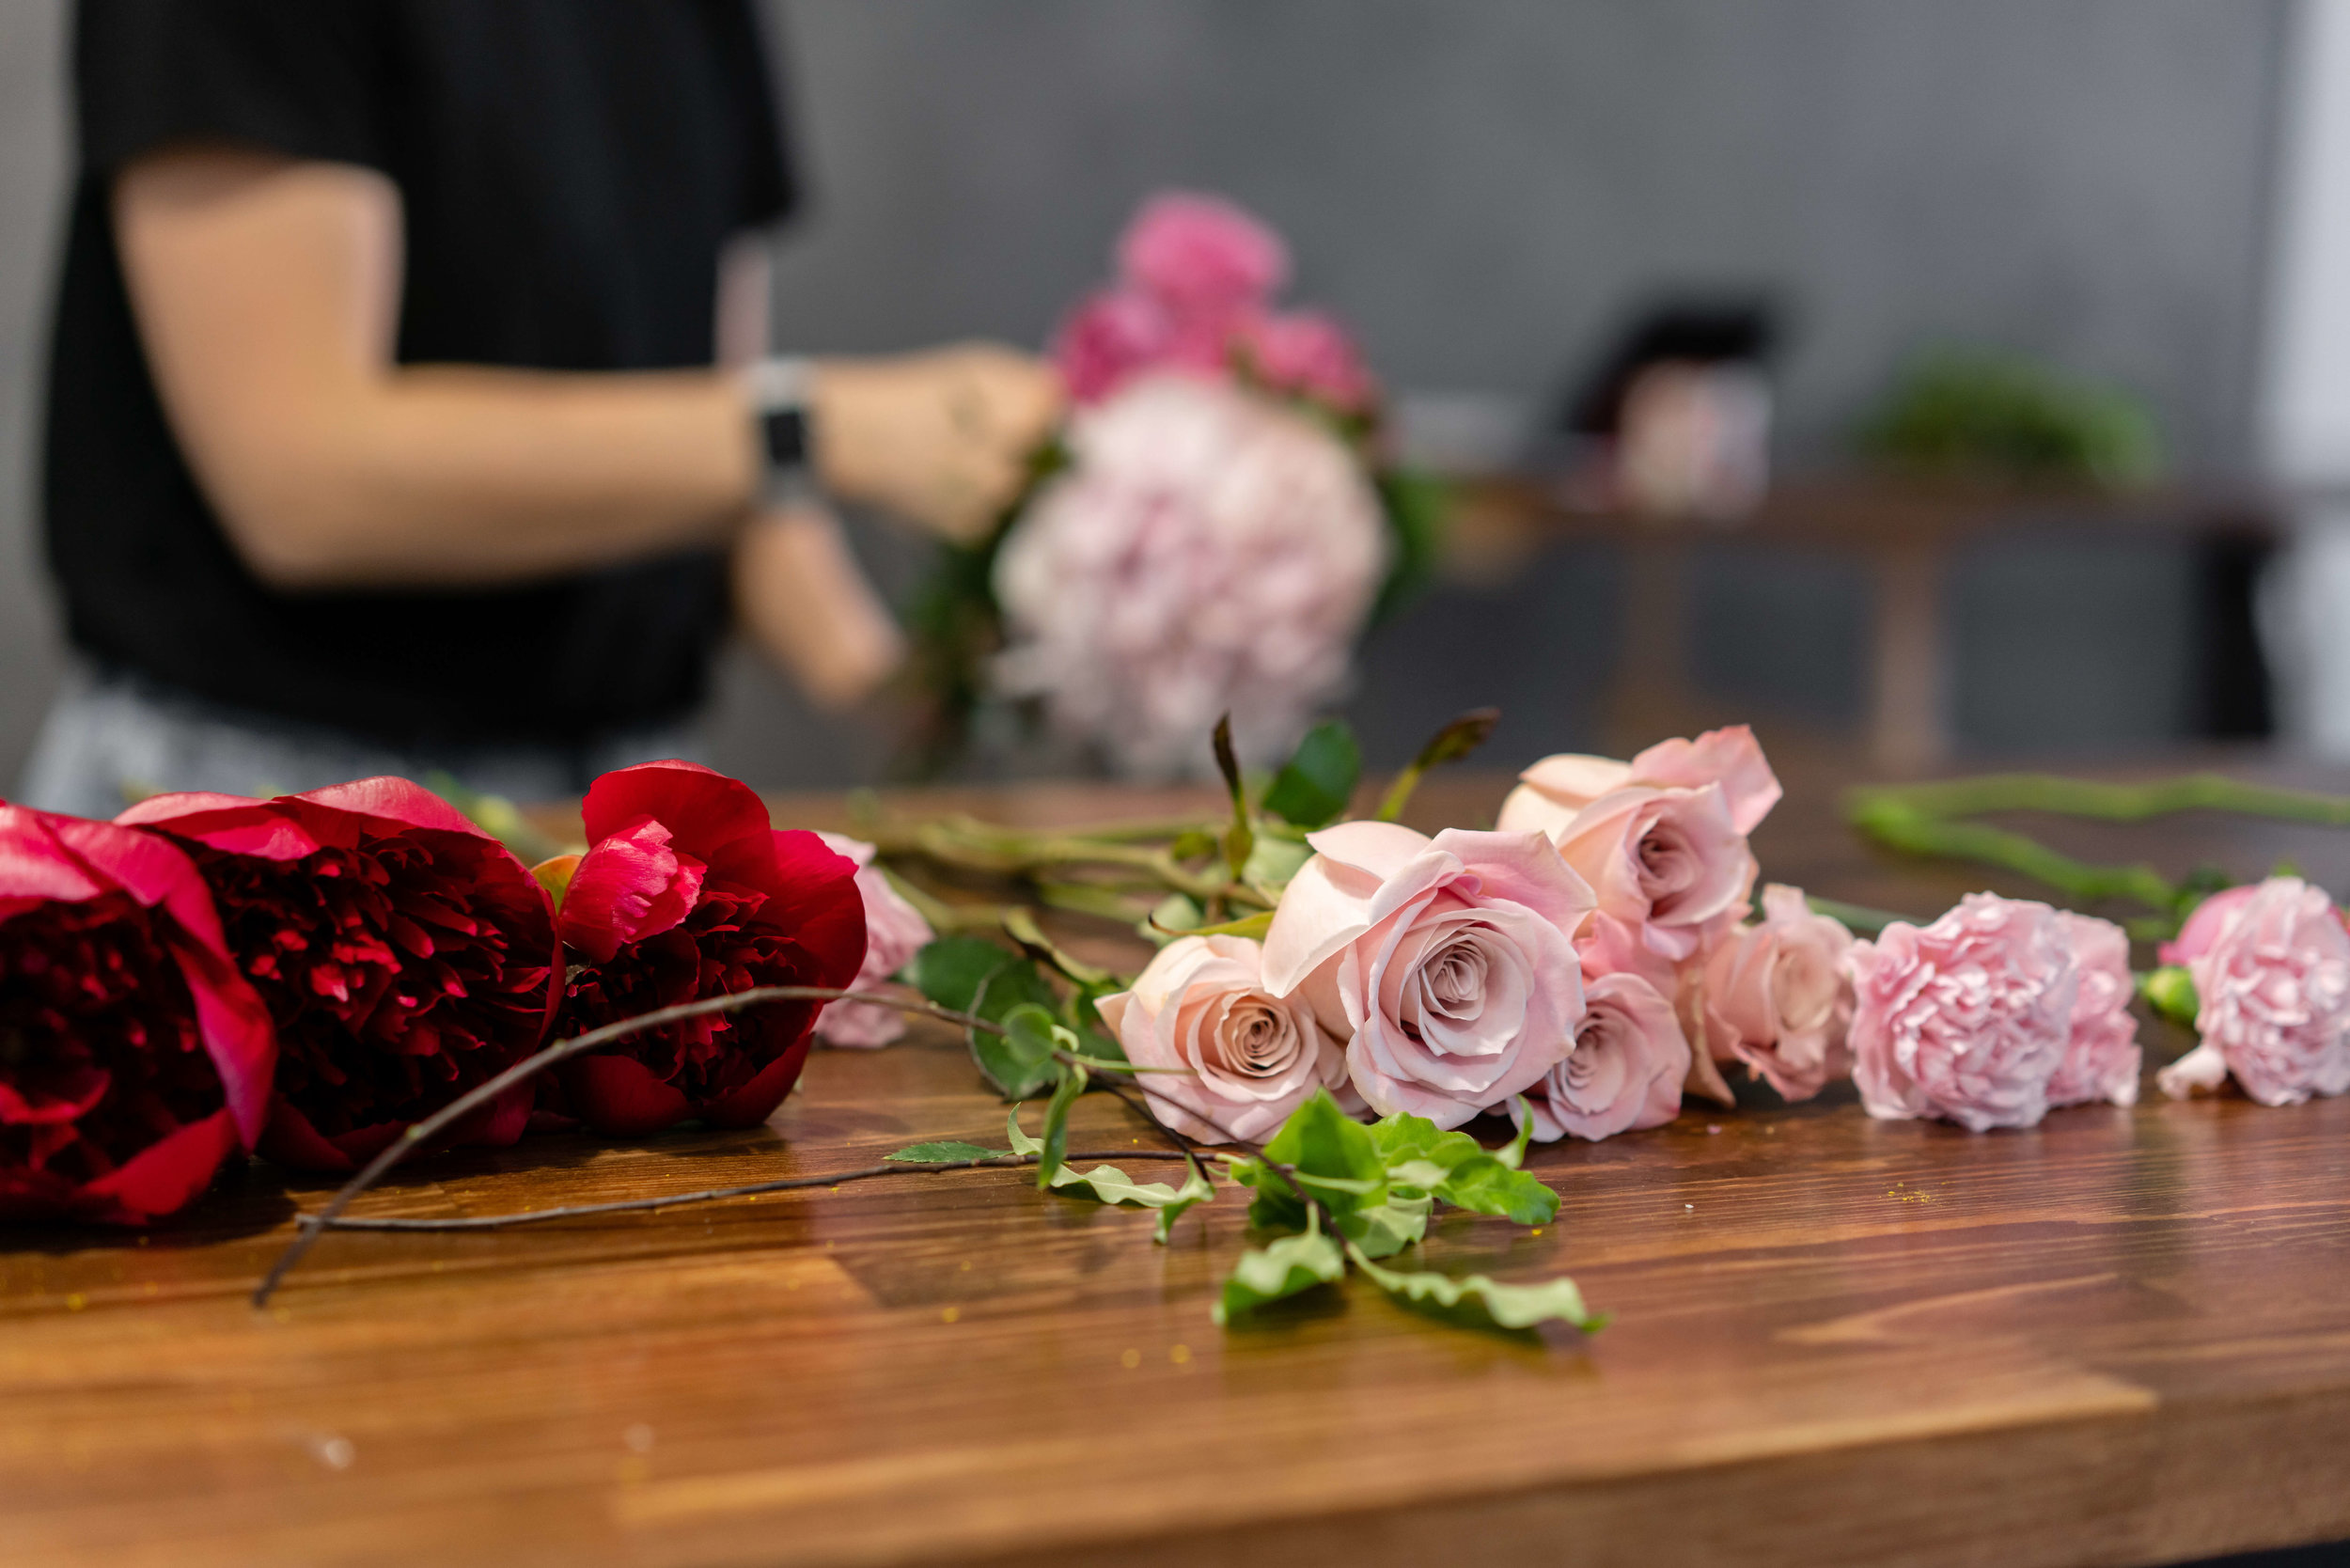 Roses, carnations and peonies laid out for a workshop